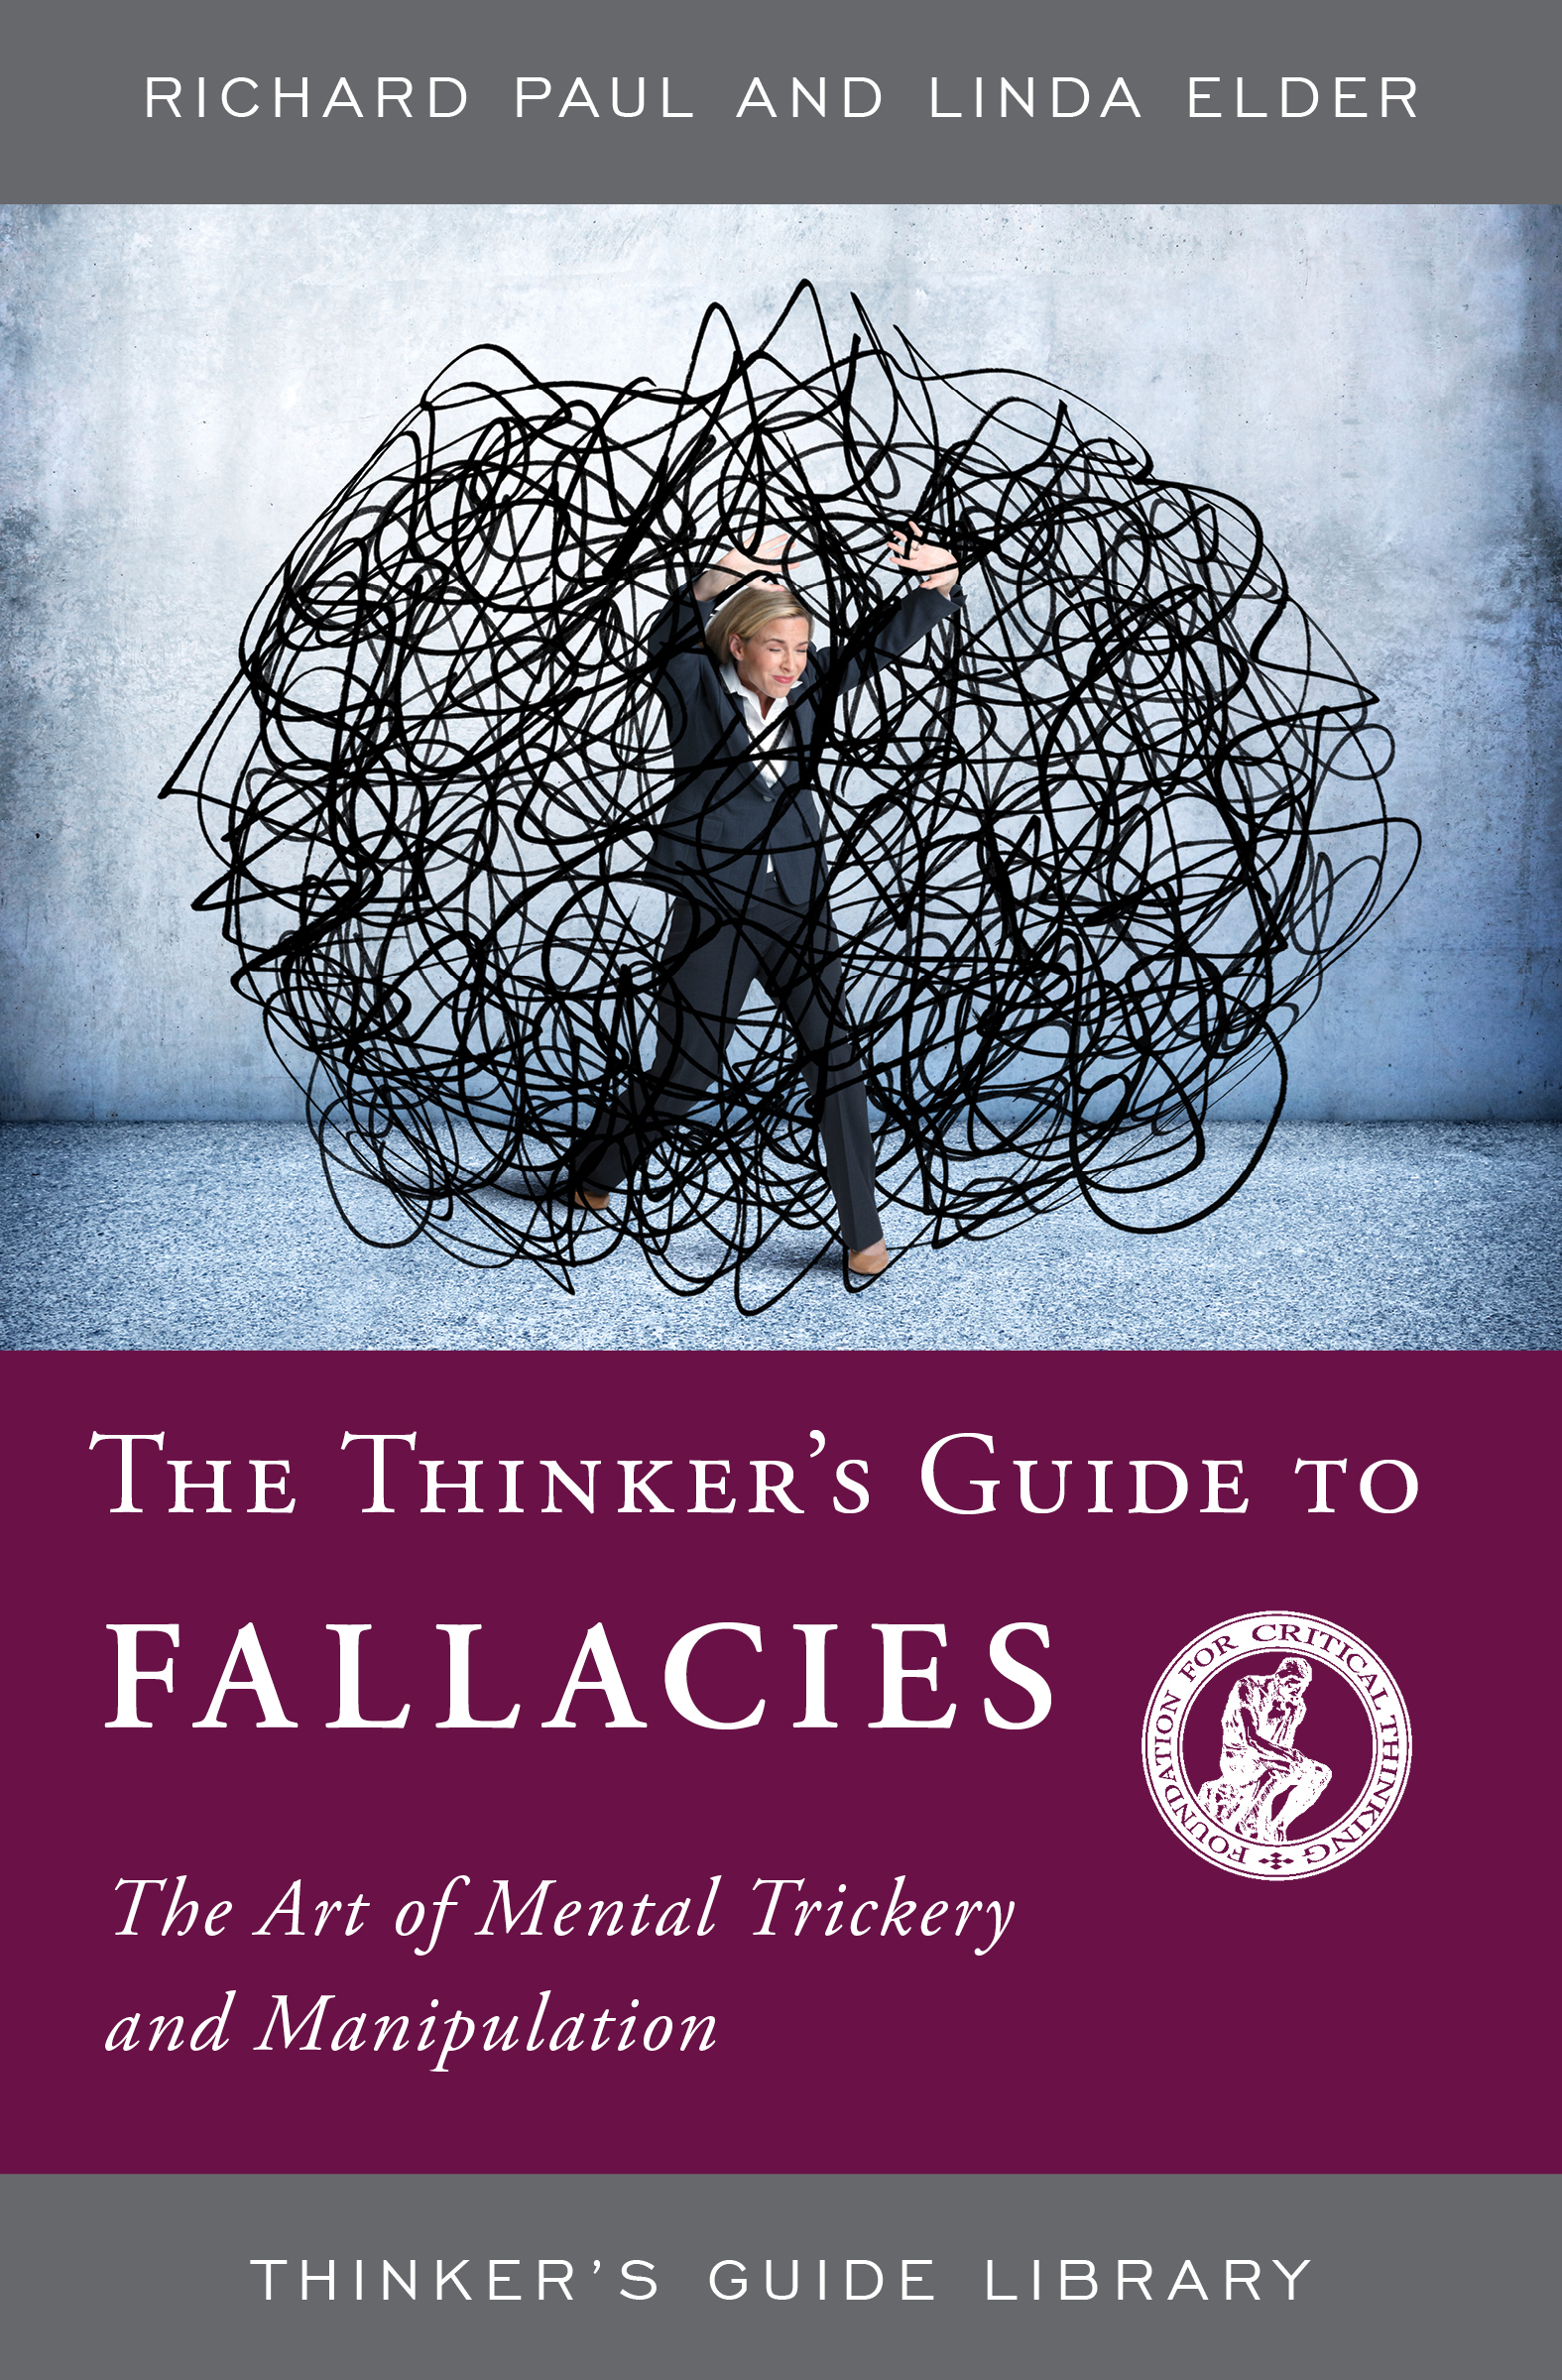 The Thinker's Guide to Fallacies: The Art of Mental Trickery and Manipulation